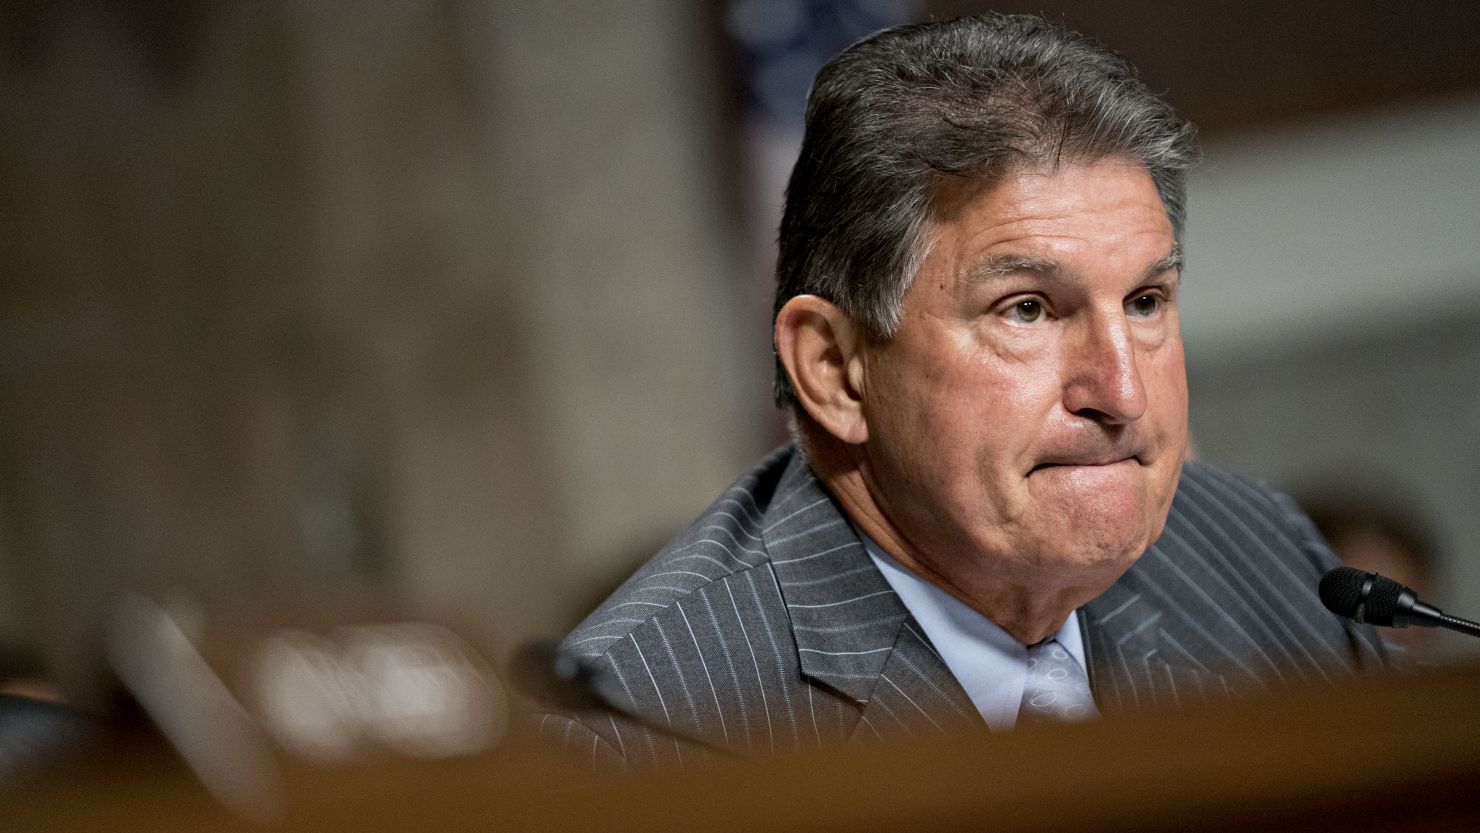 Sen. Joe Manchin, a Democrat from West Virginia, listens during a Senate Intelligence Committee hearing in Washington in September. Photographer: Andrew Harrer/Bloomberg via Getty Images